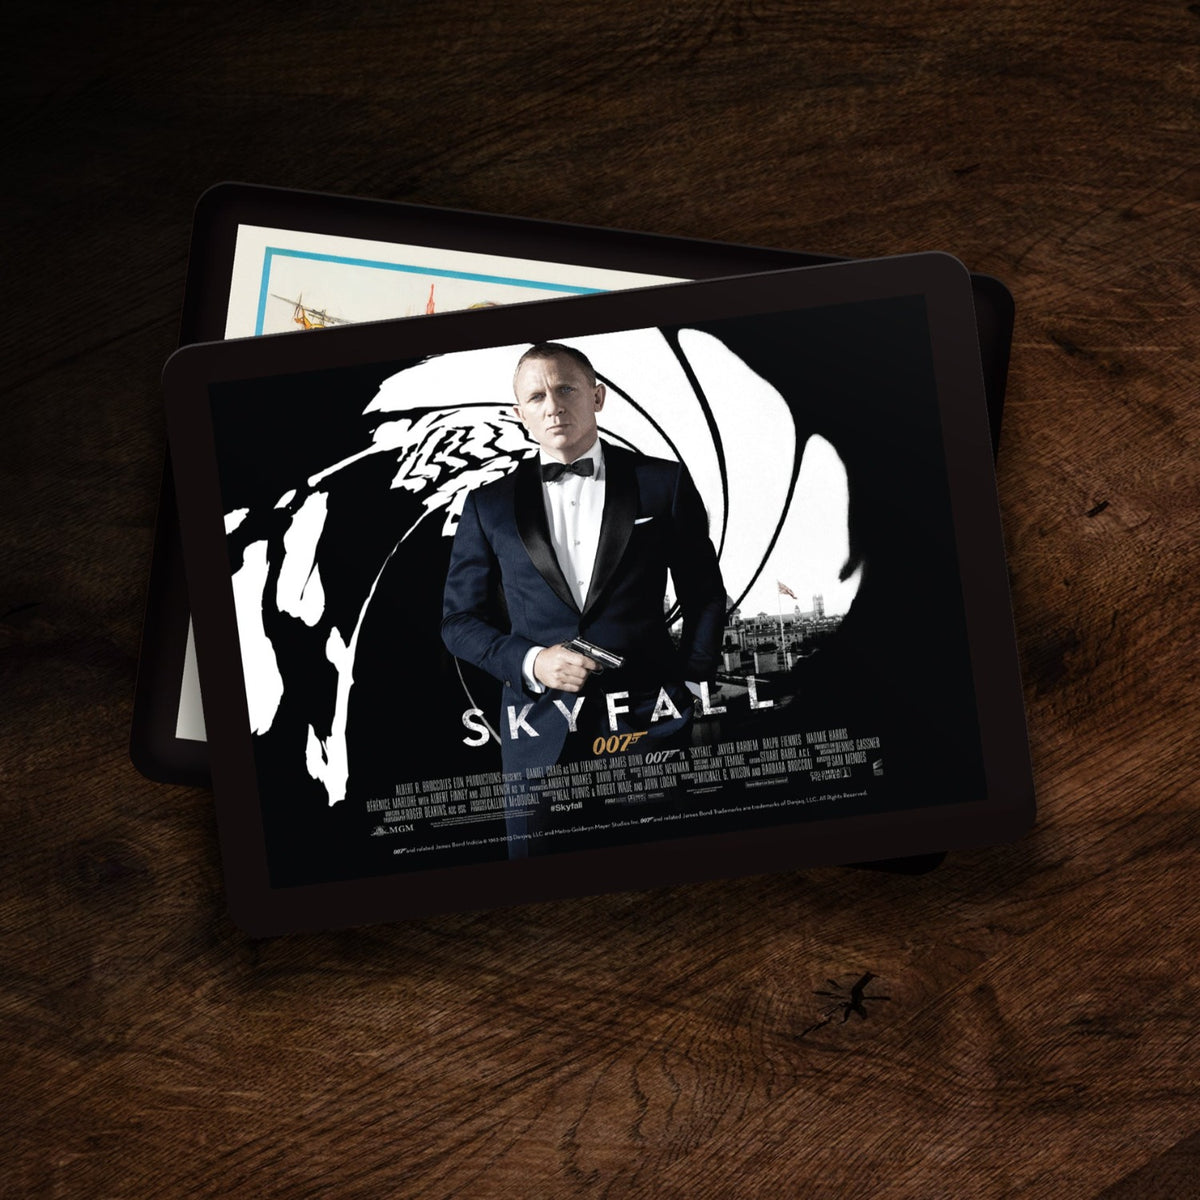 James Bond Placemat - Skyfall Edition